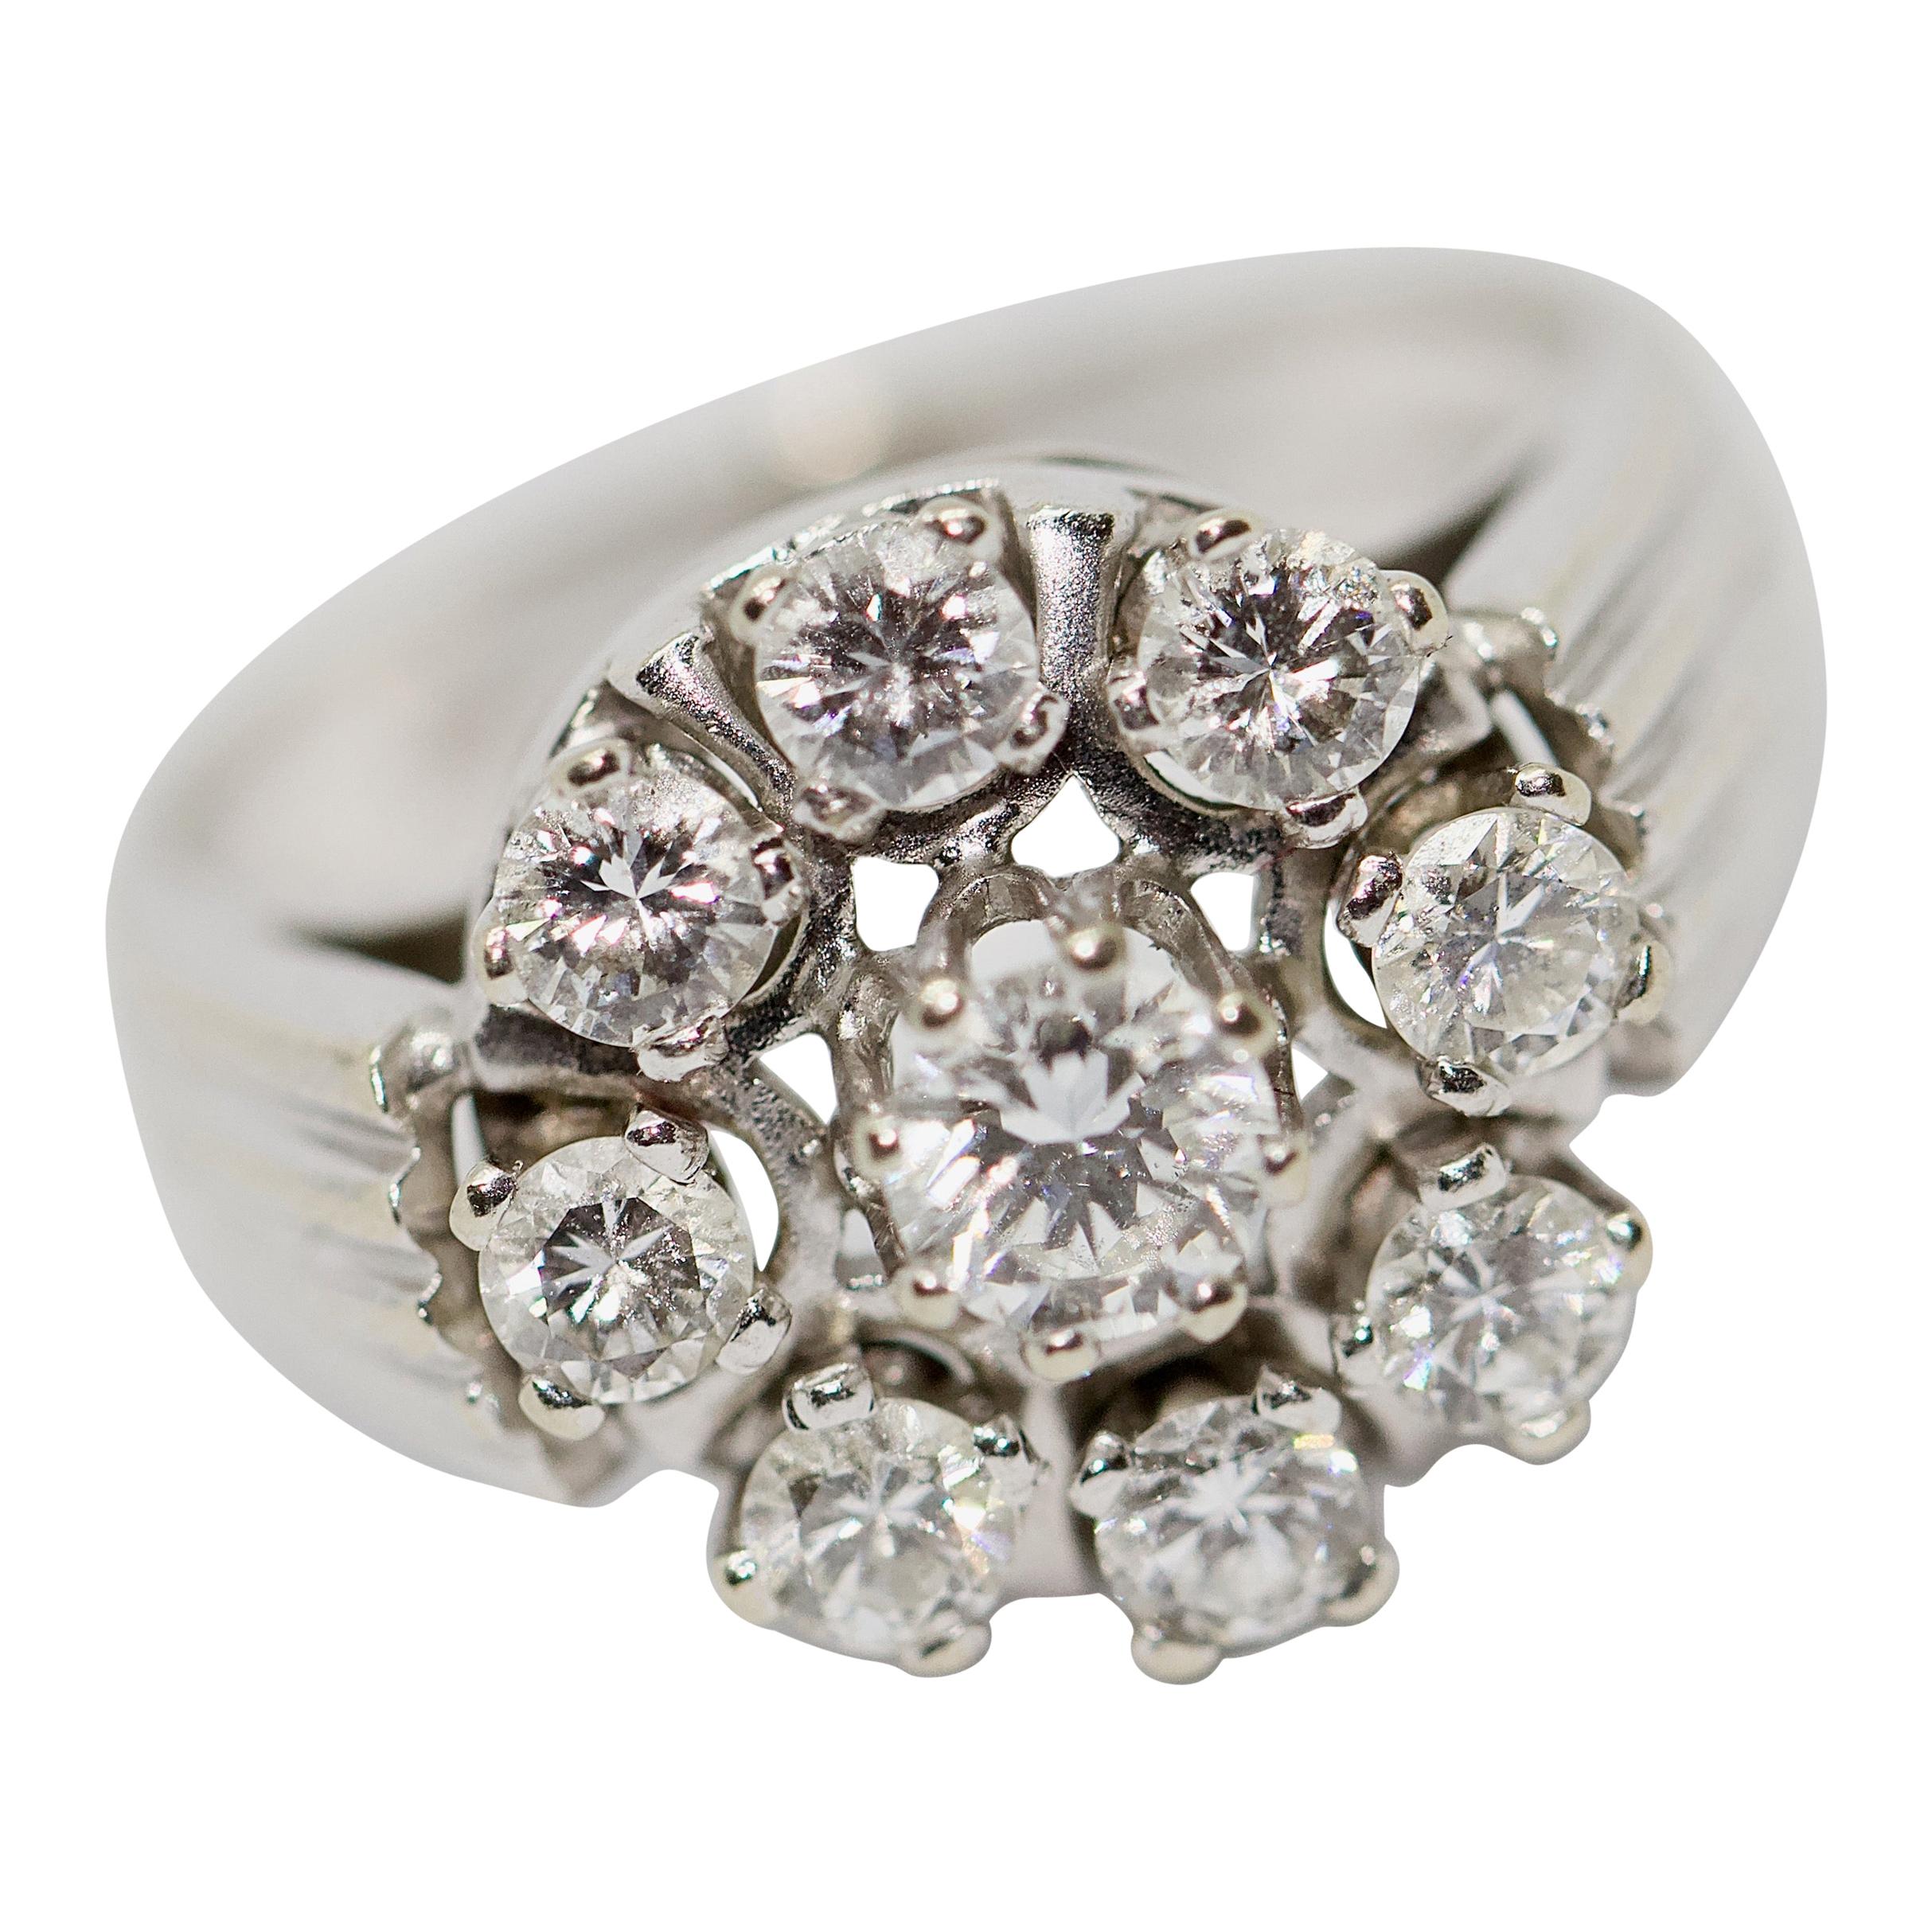 14 Karat White Gold Ring with Solitaire Diamonds